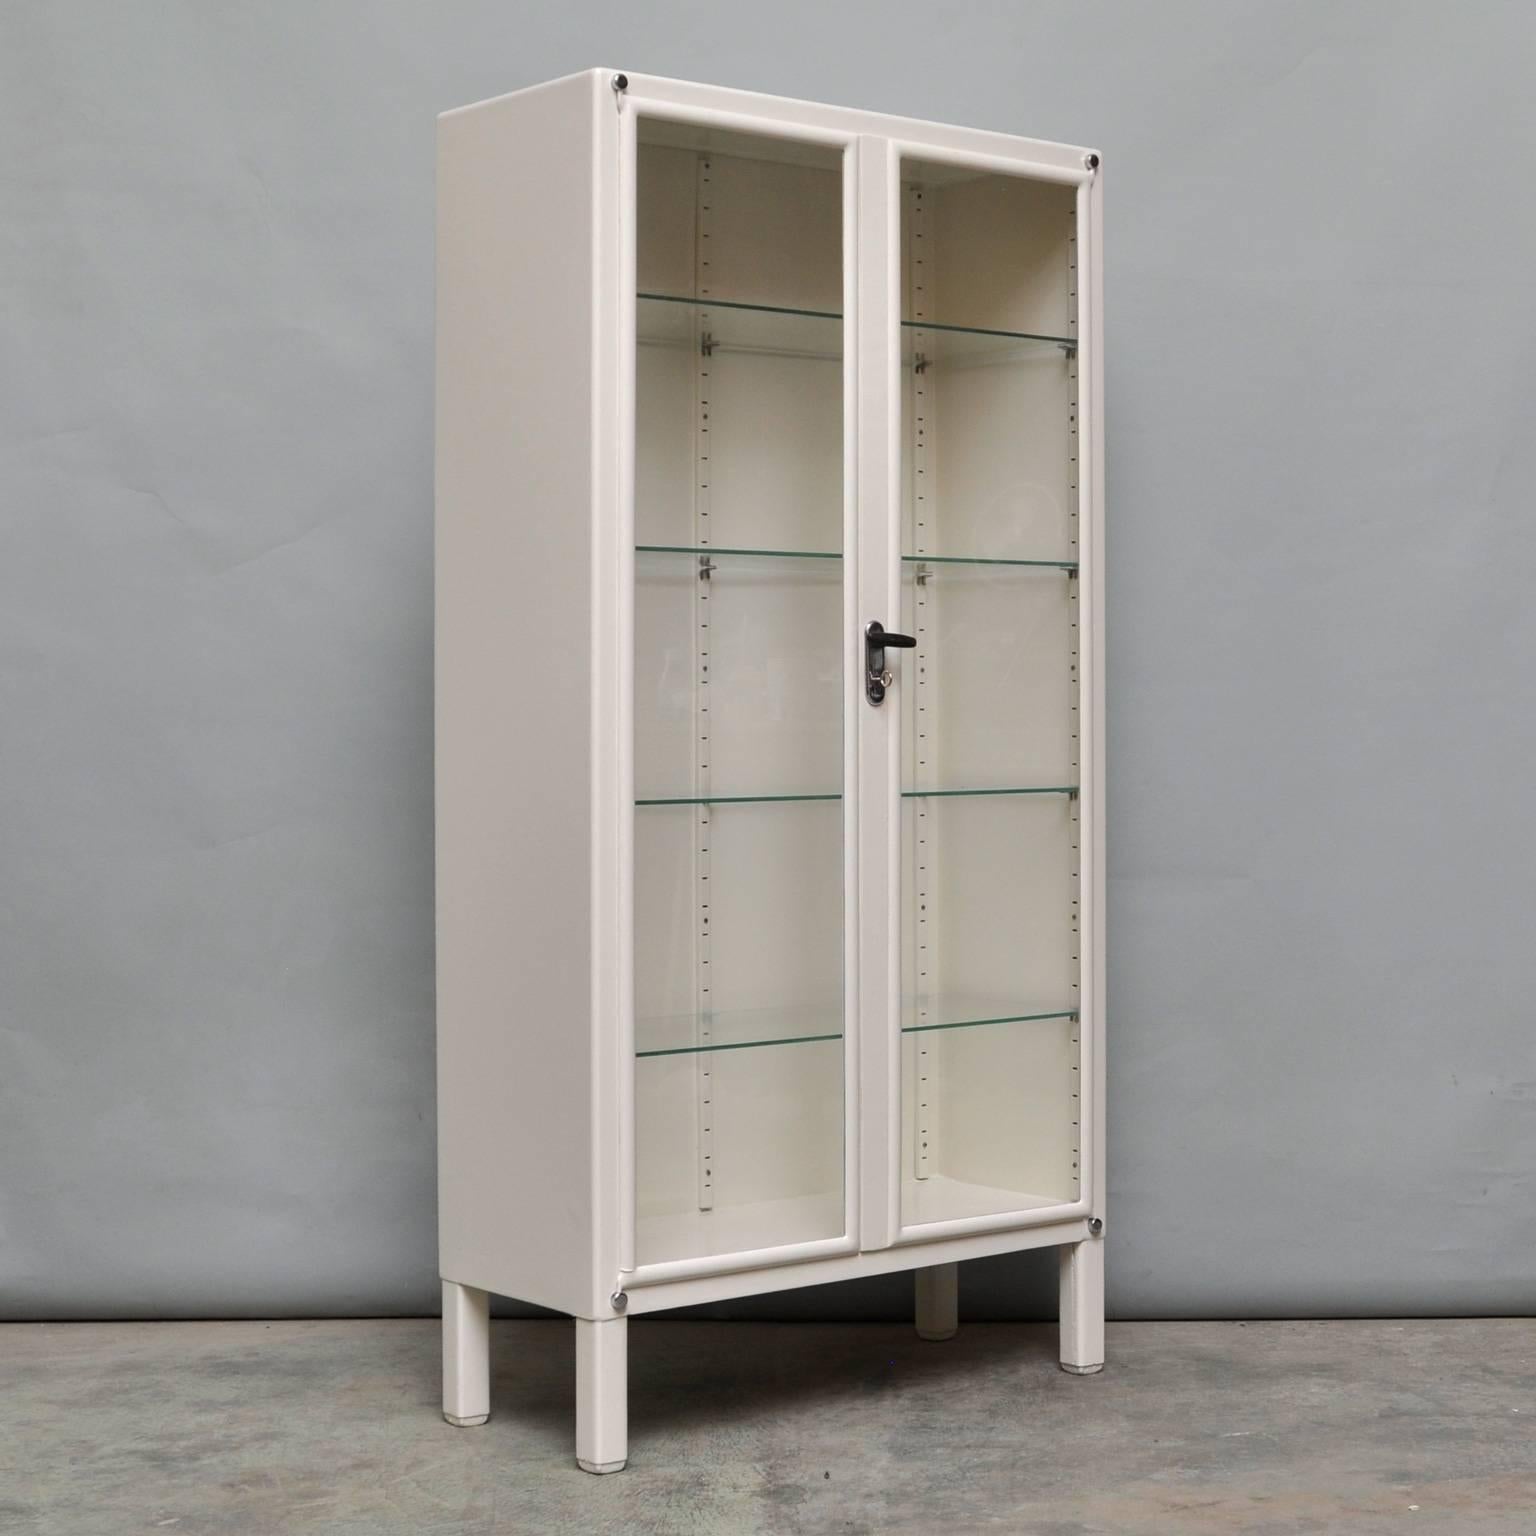 Medical cabinet from Czechoslovakia
Produced by Kovona, circa 1955
With four adjustable shelves
The cabinet is restored.